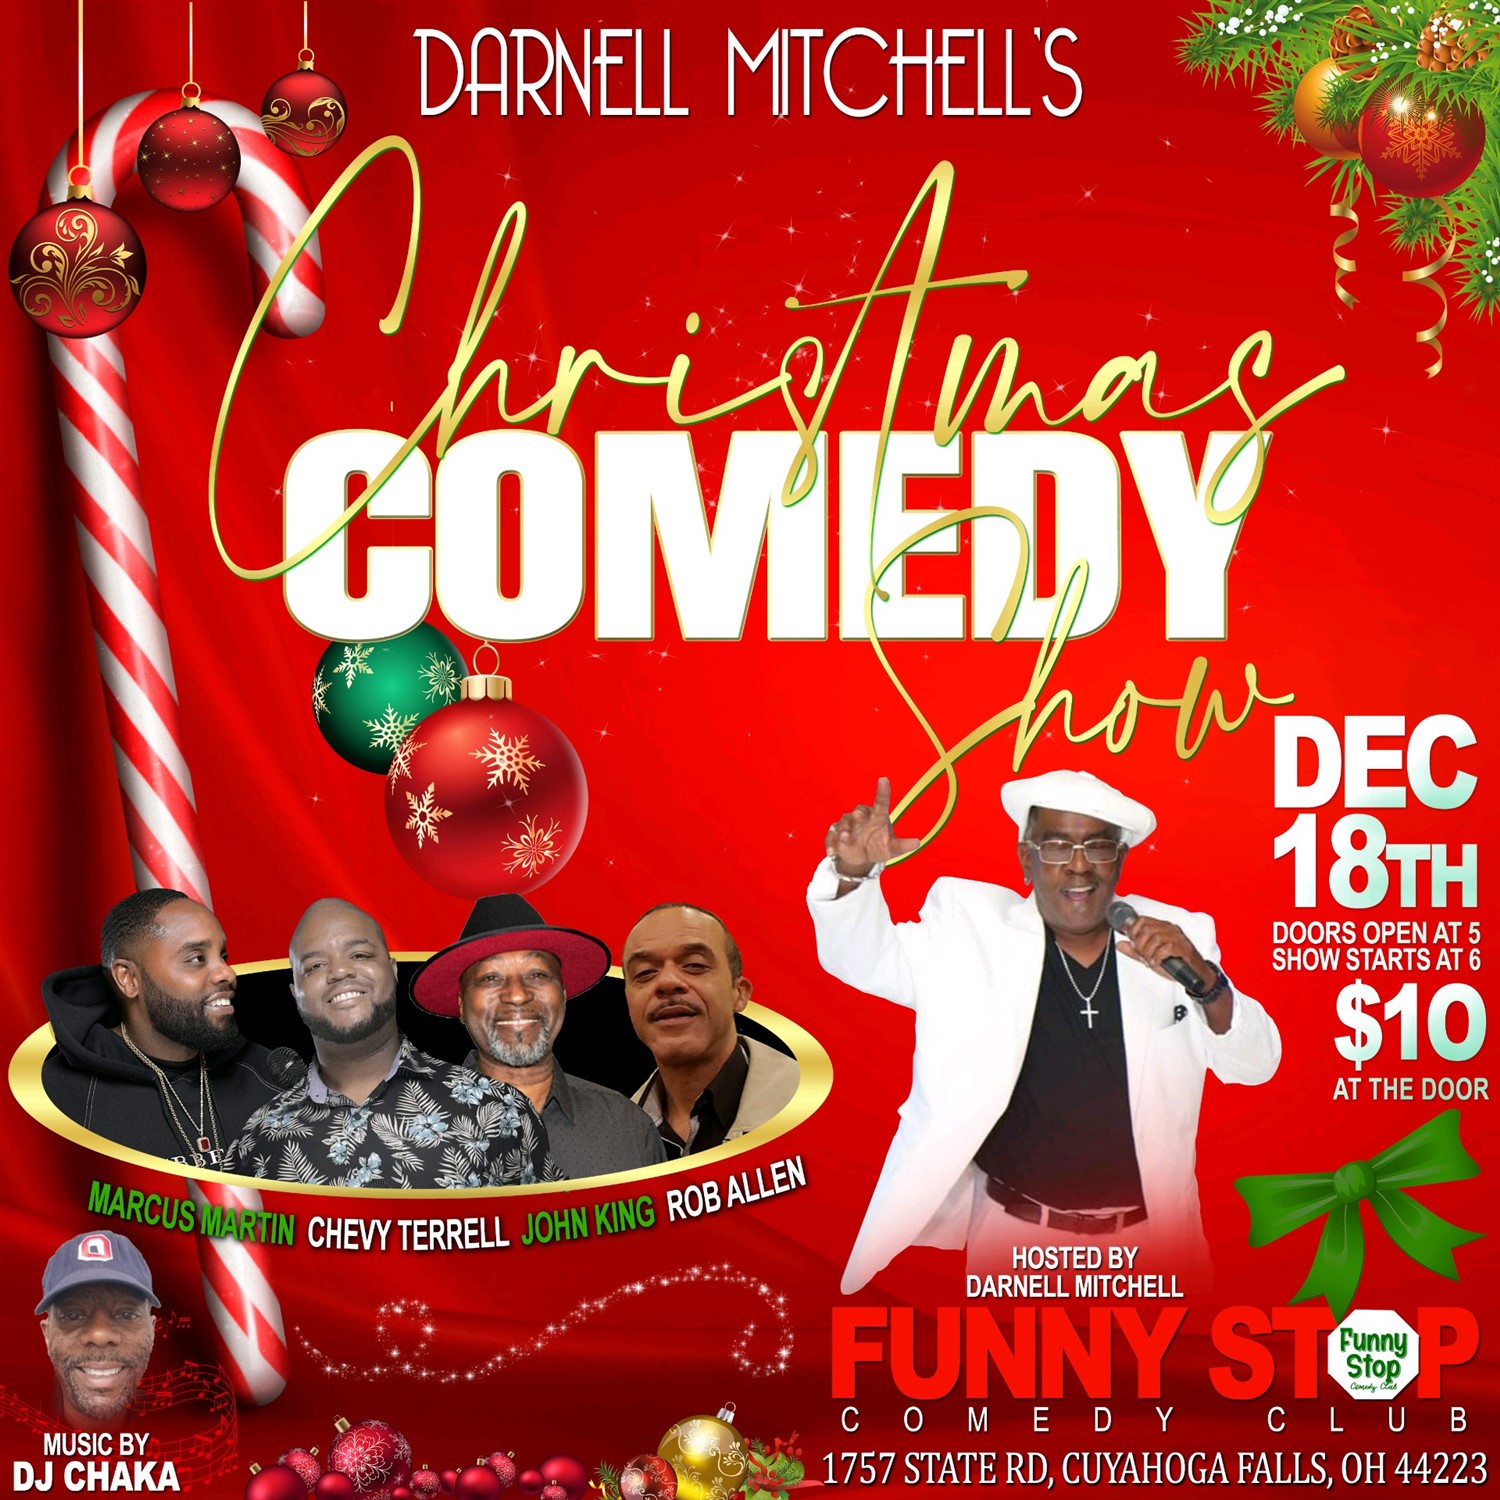 Christmas Comedy Show hosted by Darnell Mitchell featuring Marcus Martin, Chevy Terrell, John King, Rob Allen, and DJ Chaka at Funny Stop Comedy Club on Dec 18, 18:00@Funny Stop Comedy Club - Buy tickets and Get information on Funny Stop funnystop.online